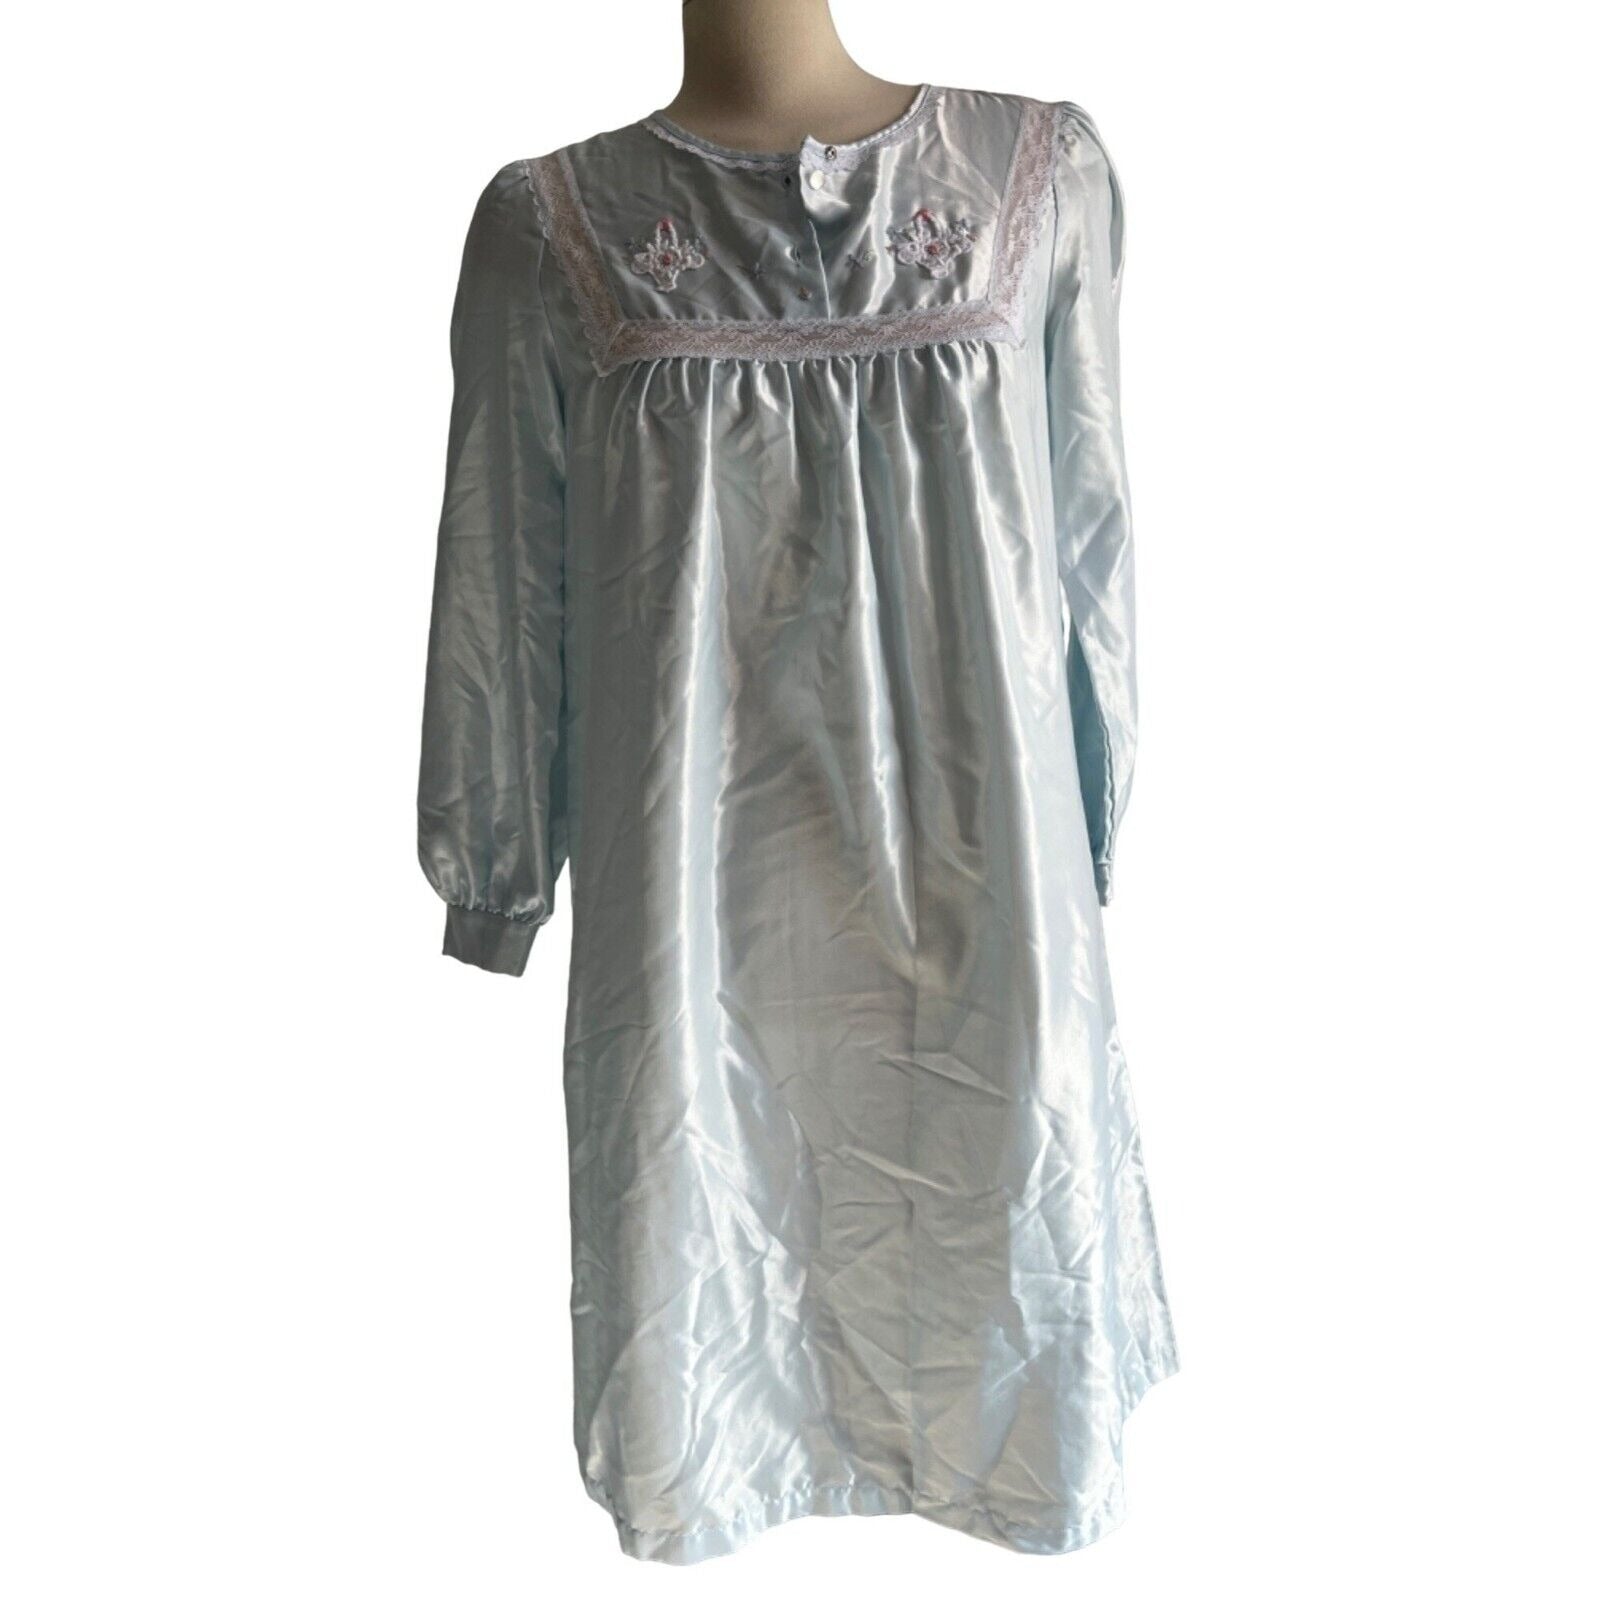 Vintage Silky Nightgown by Barbizon Sz Small Womens Baby Blue Floral Lace